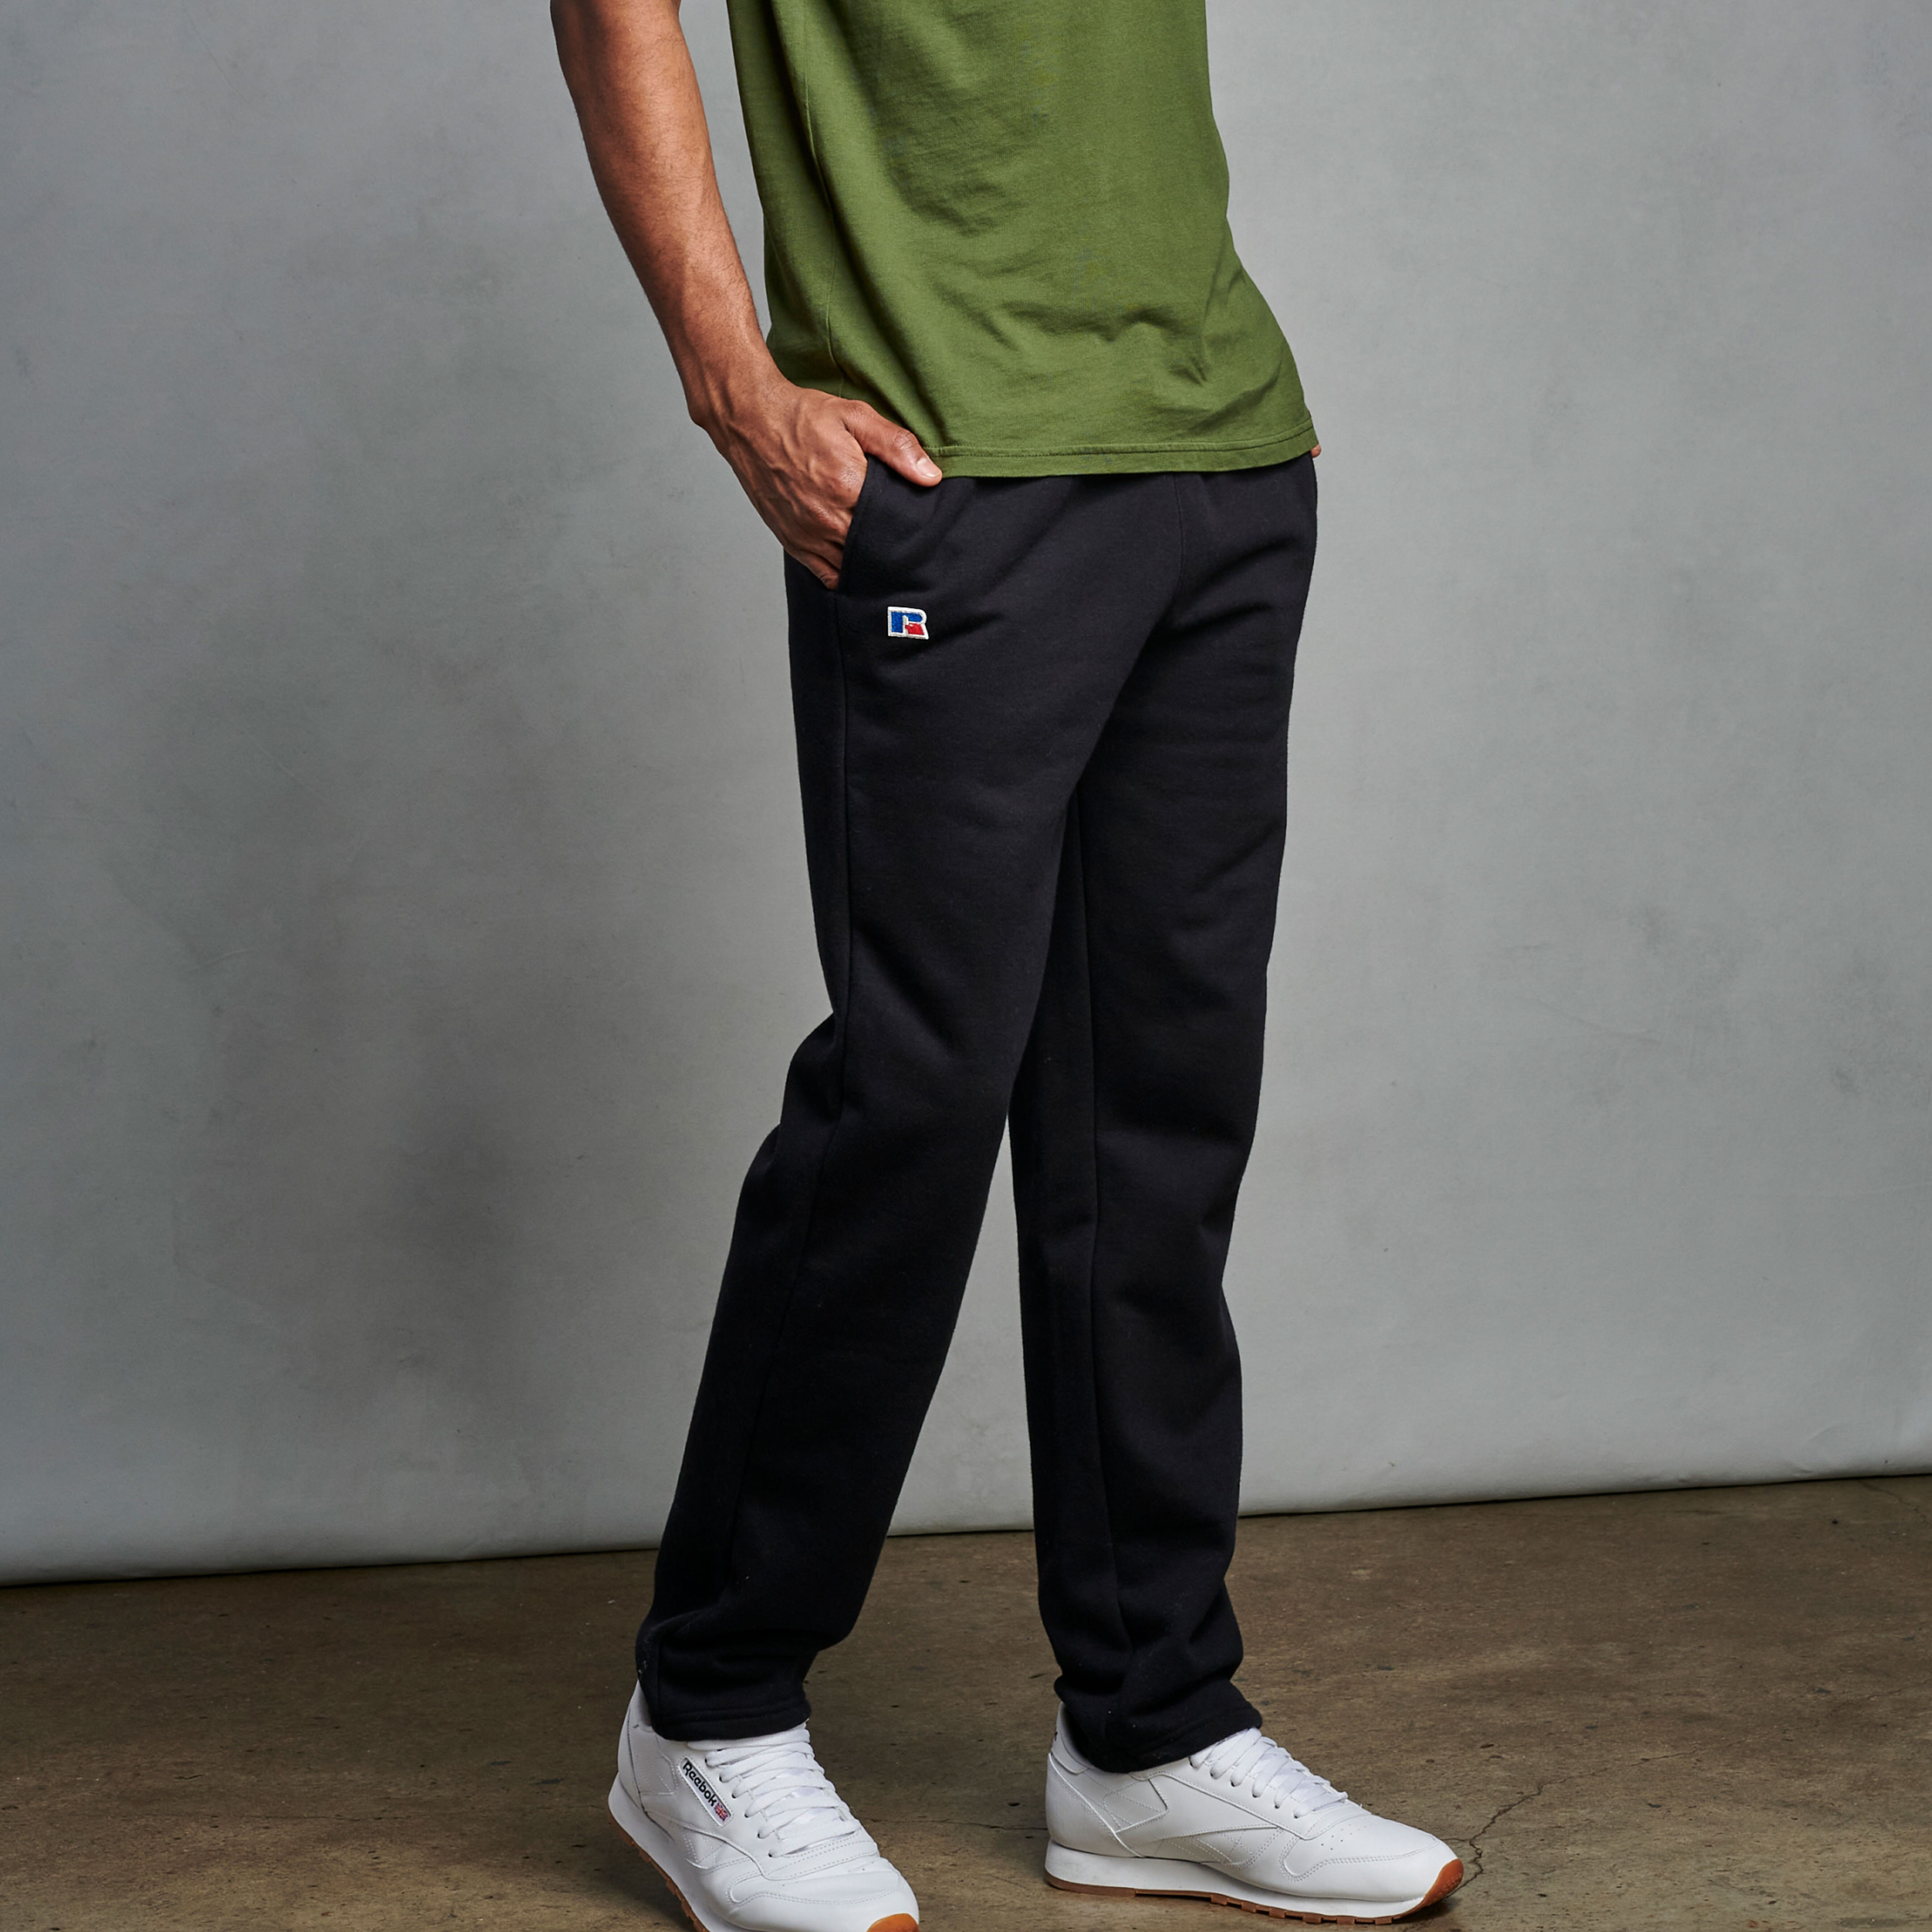 russell athletic pants mens